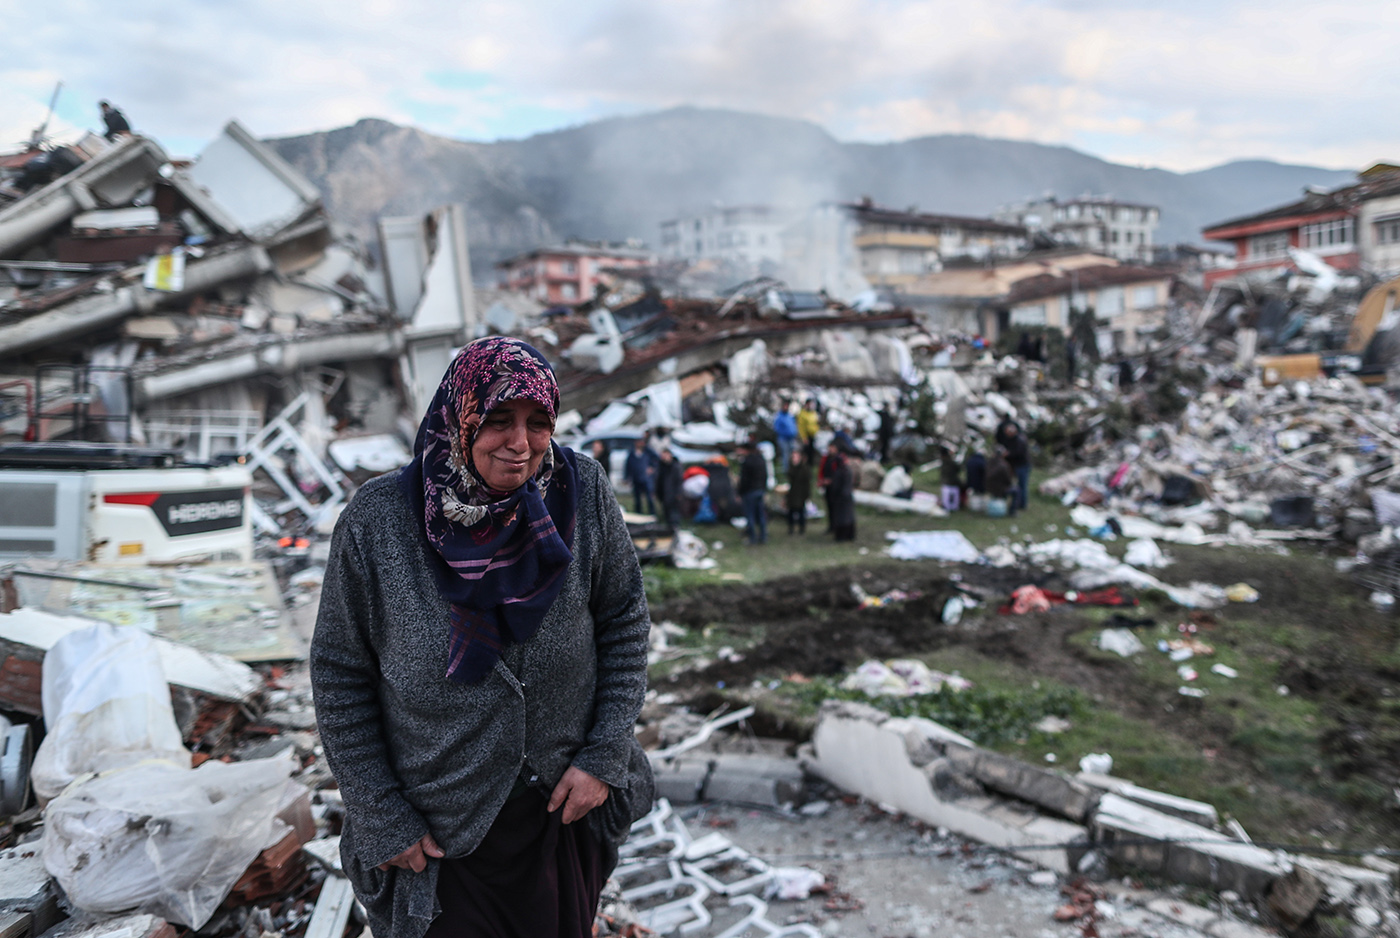 People search their relatives at the site of a collapsed building after an earthquake in Hatay, Turkey, 07 February 2023. According to the US Geological Service, an earthquake with a preliminary magnitude of 7.8 struck southern Turkey close to the Syrian border. The earthquake caused buildings to collapse and sent shockwaves over northwest Syria, Cyprus, and Lebanon. Thousands of people have died and more than seven thousand have been injured in Turkey, according to AFAD, Turkish Disaster and Emergency Management Presidency.